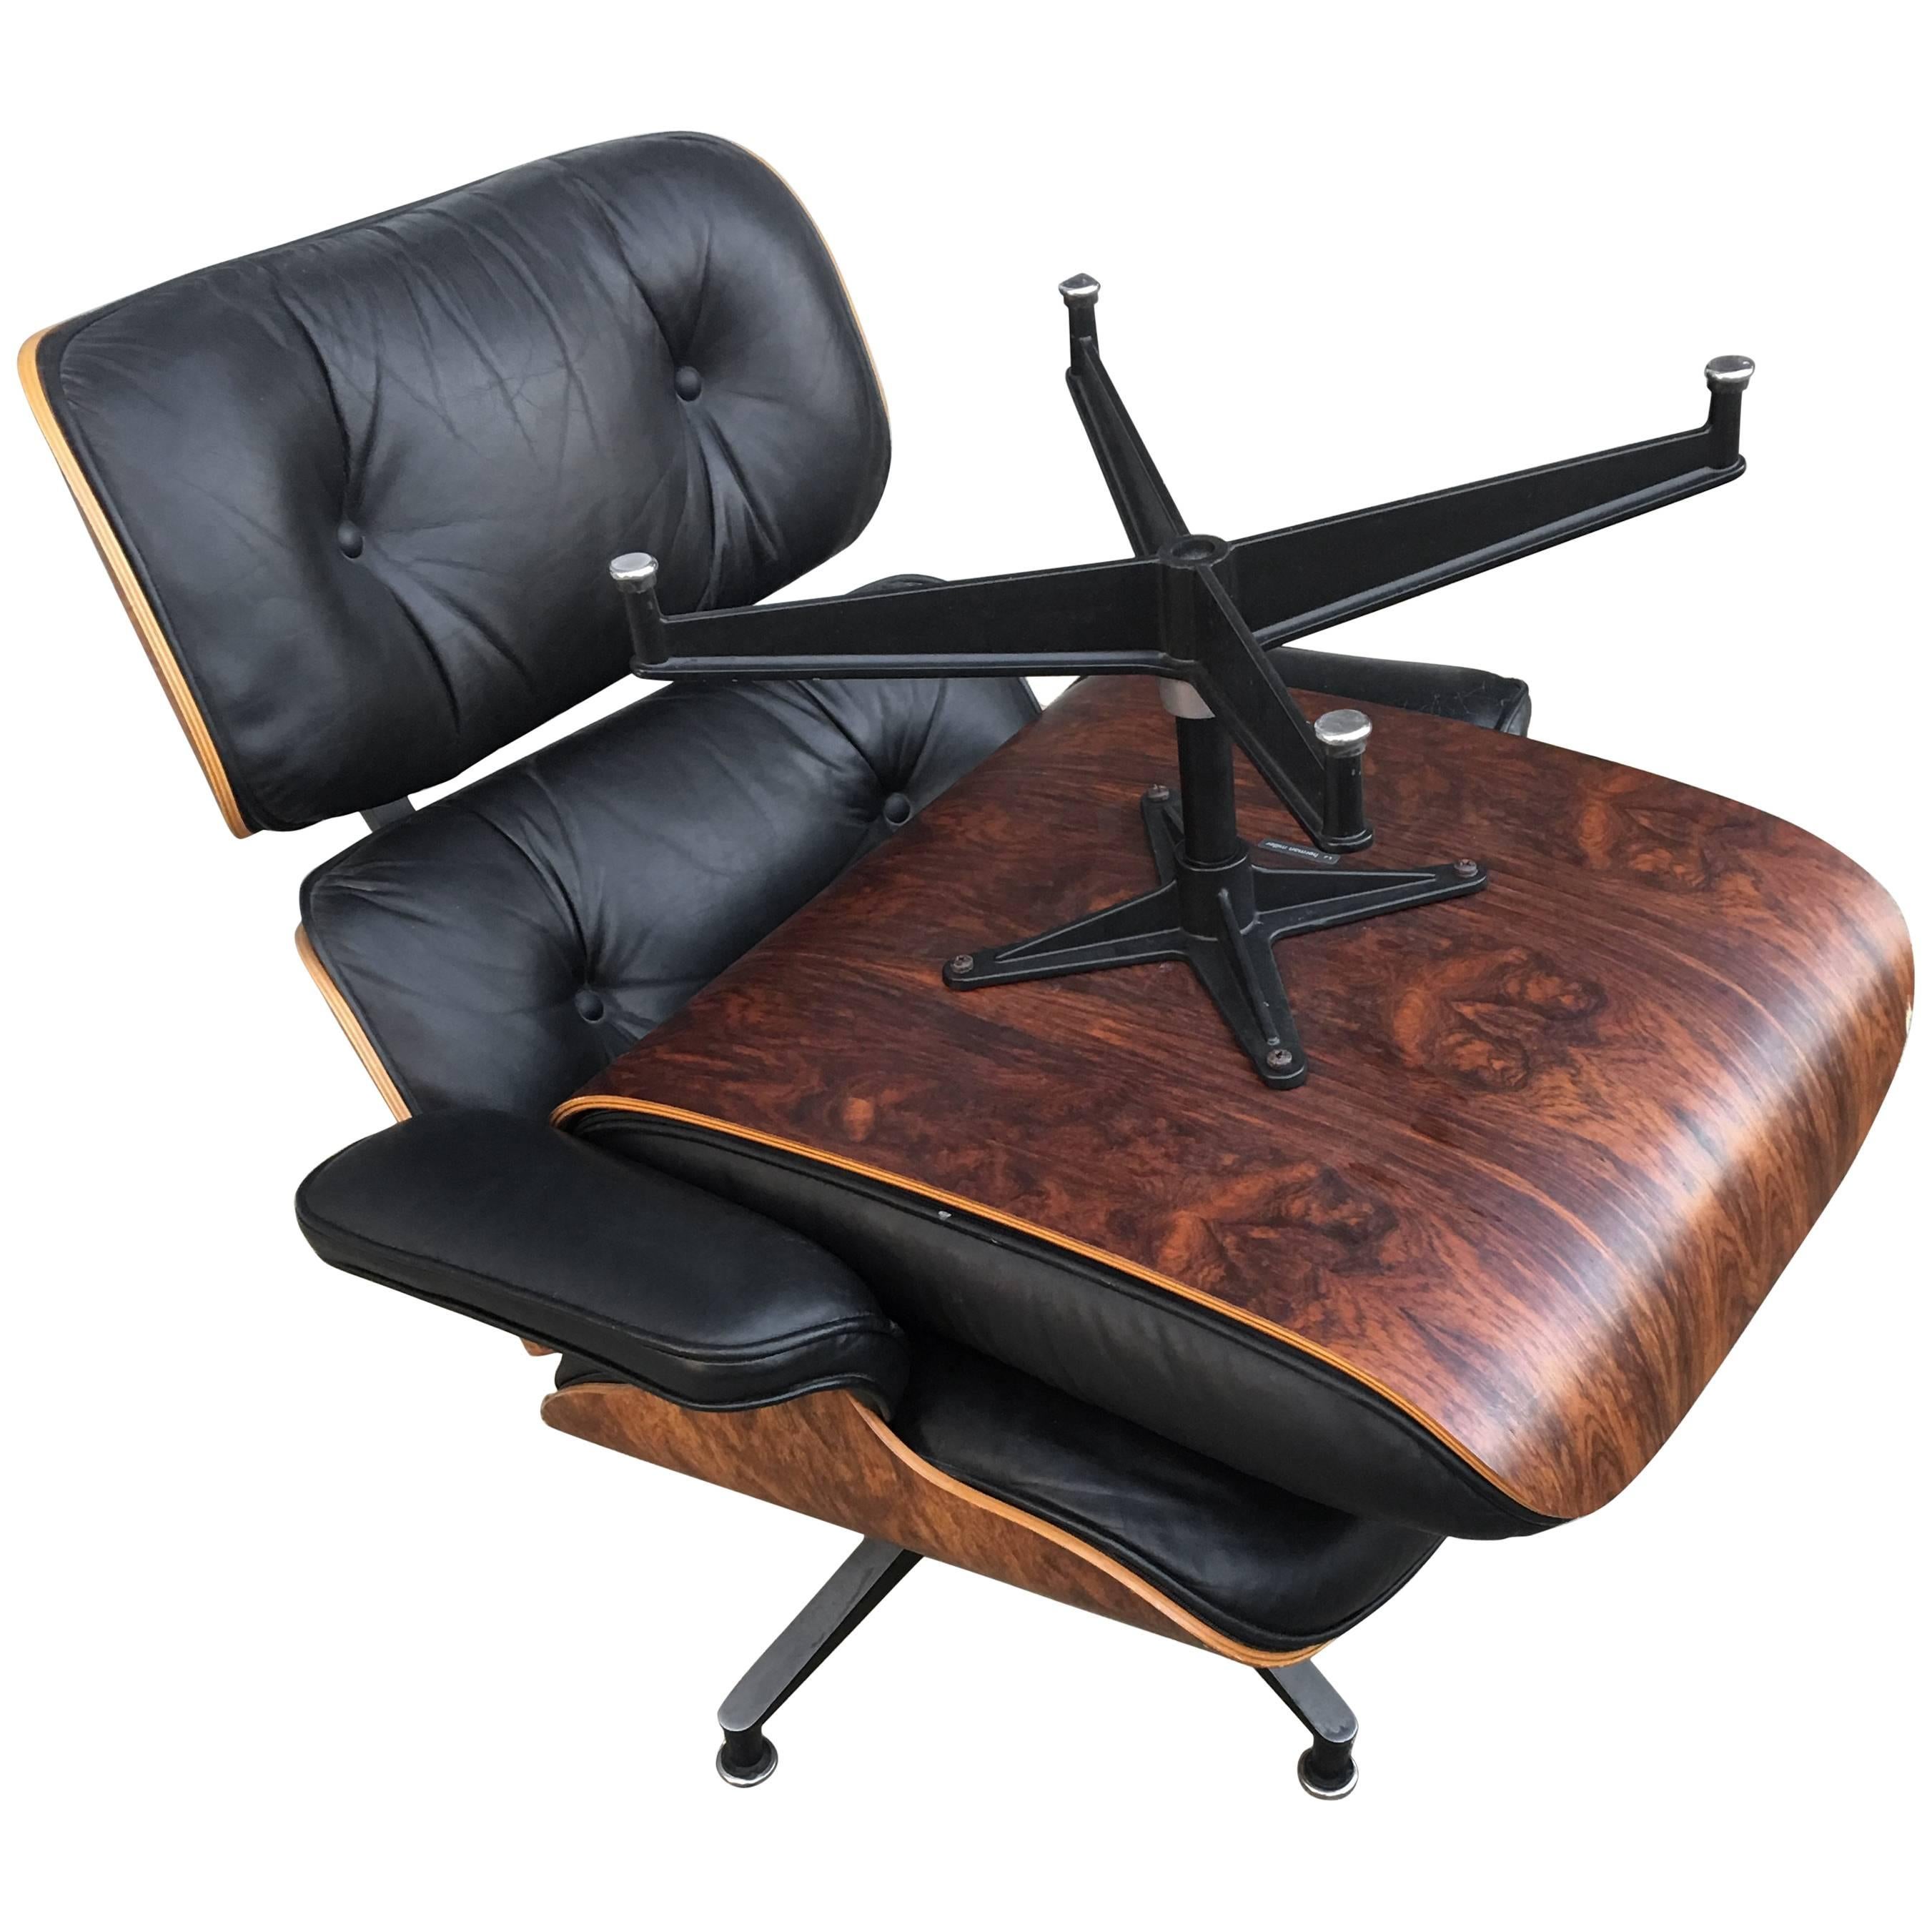 1970s Herman Miller Eames Lounge and ottoman. In very excellent vintage condition with original black leather cushions and some of the best wood we have ever seen on this chair. The grain figuration and depth of color are superb. New seat panel